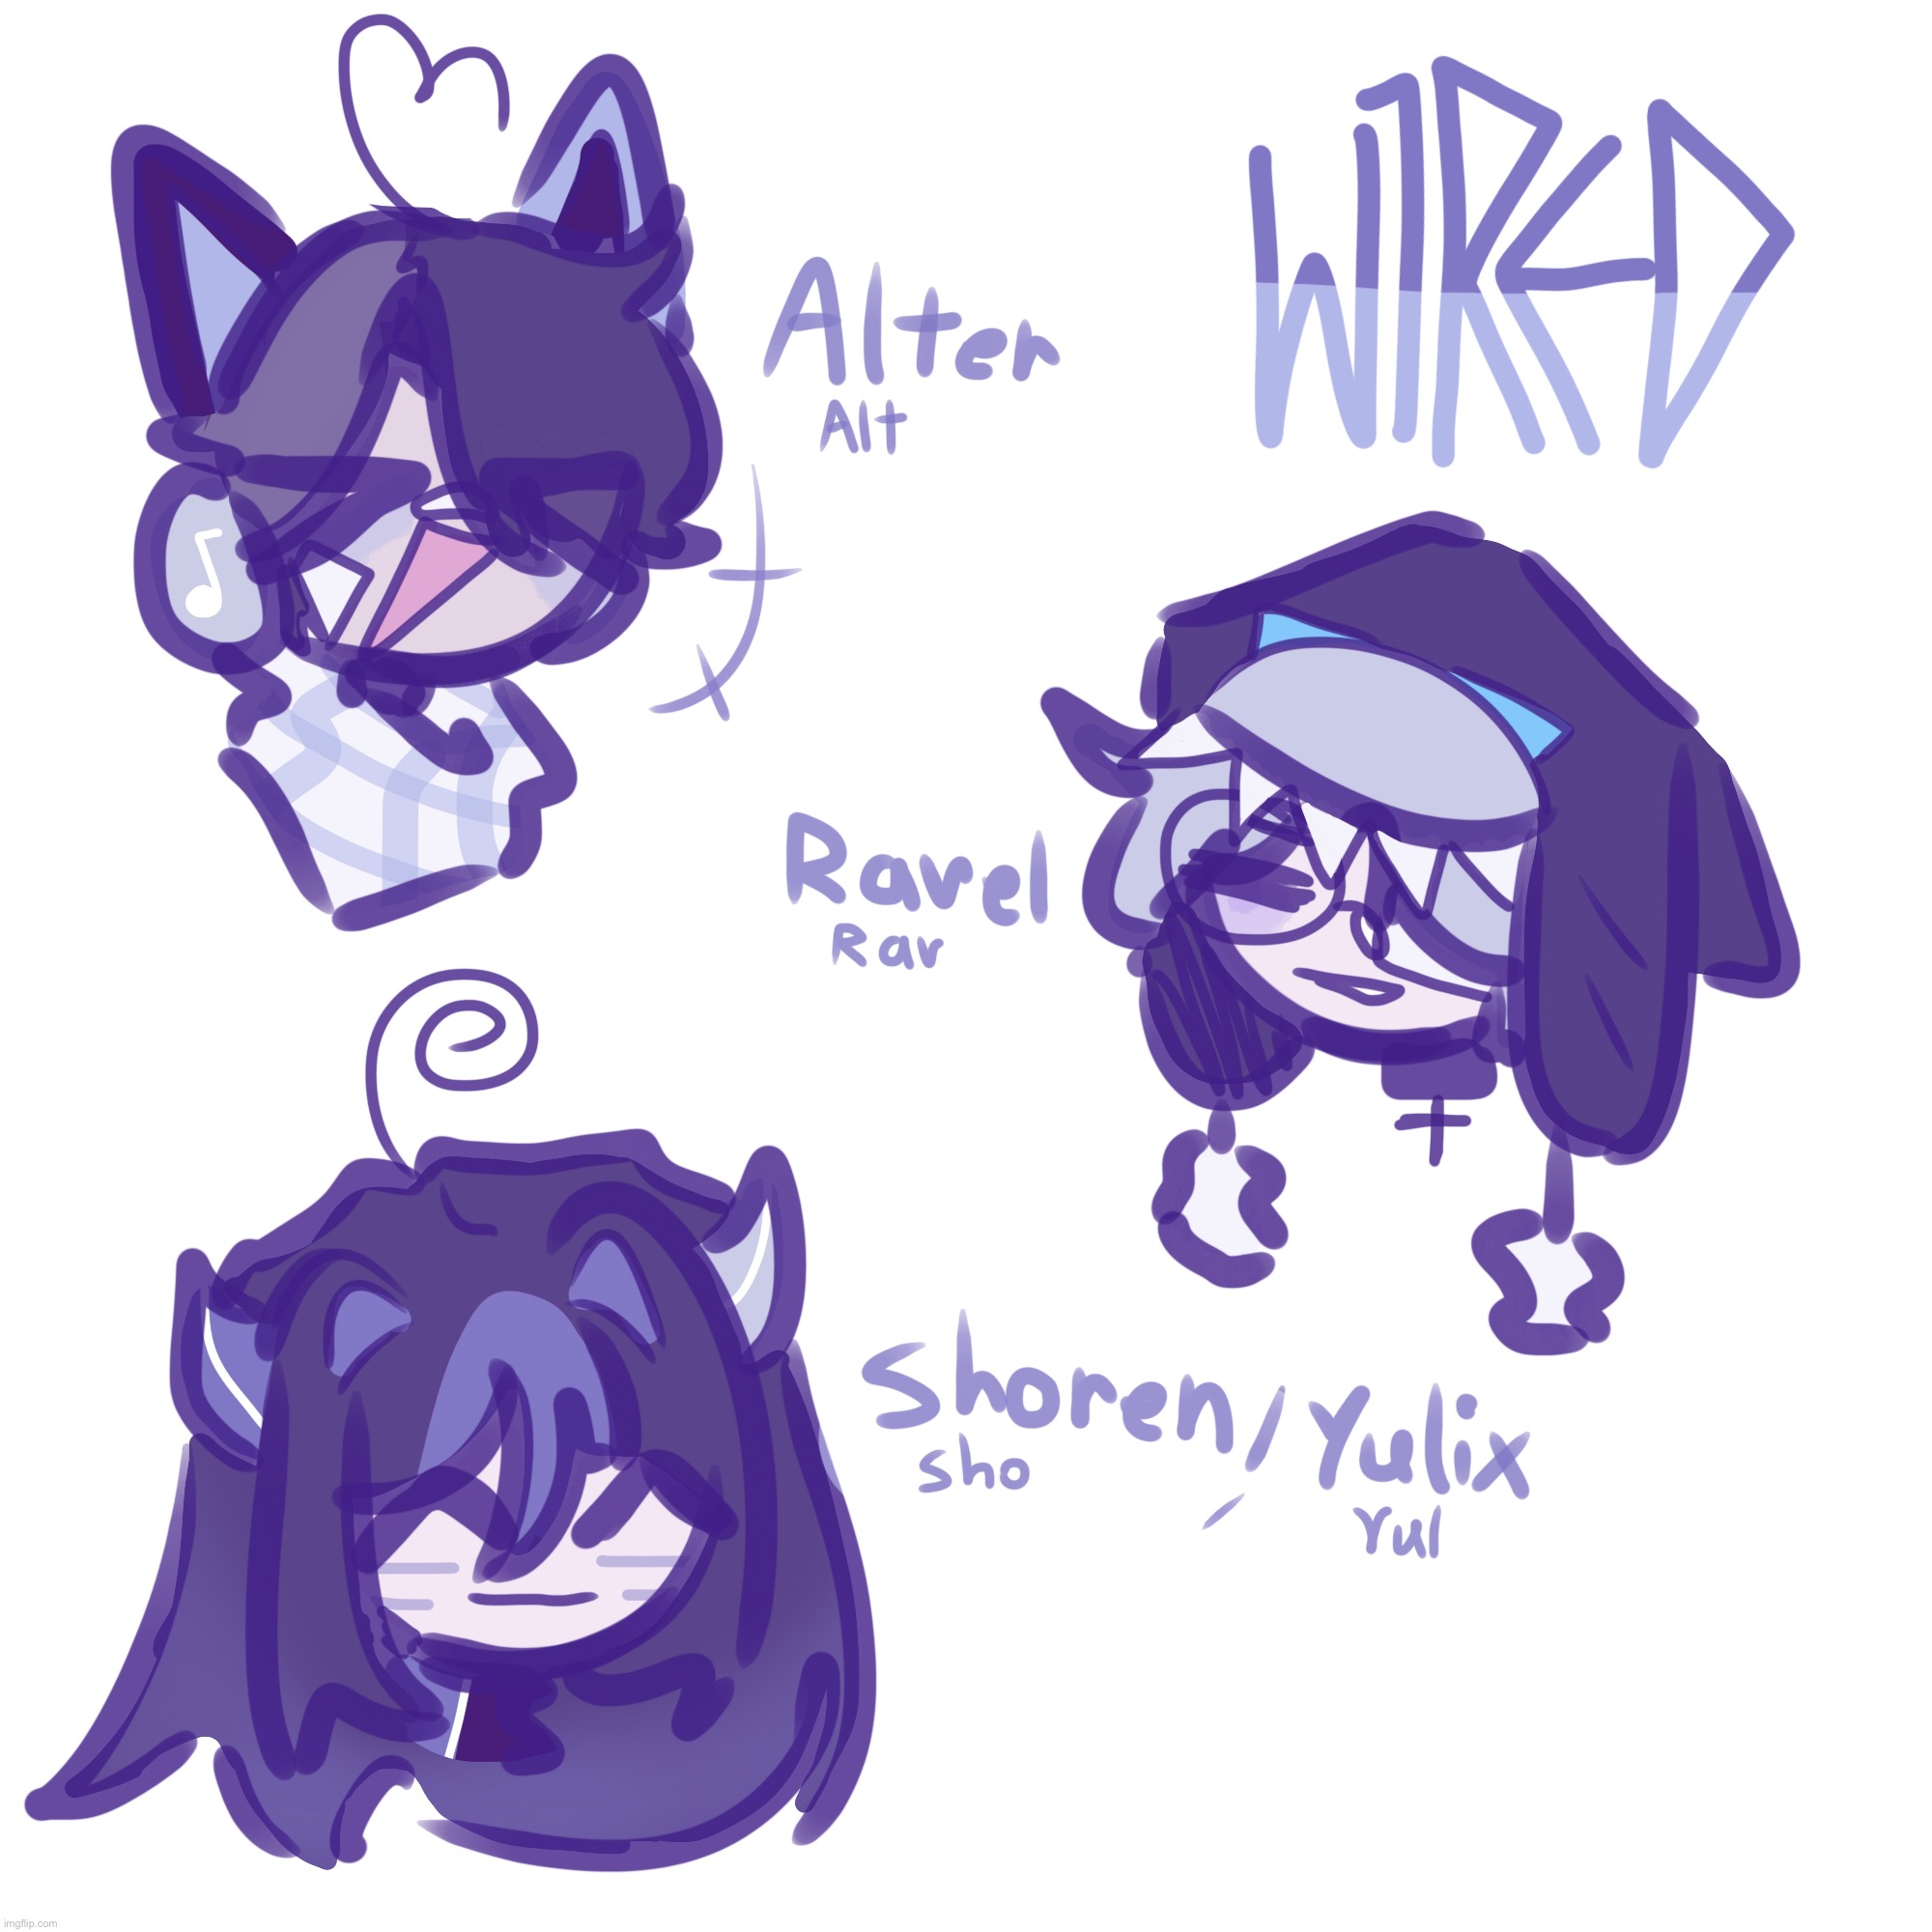 Have another doodle of W1RED and their name and nicknames | made w/ Imgflip meme maker